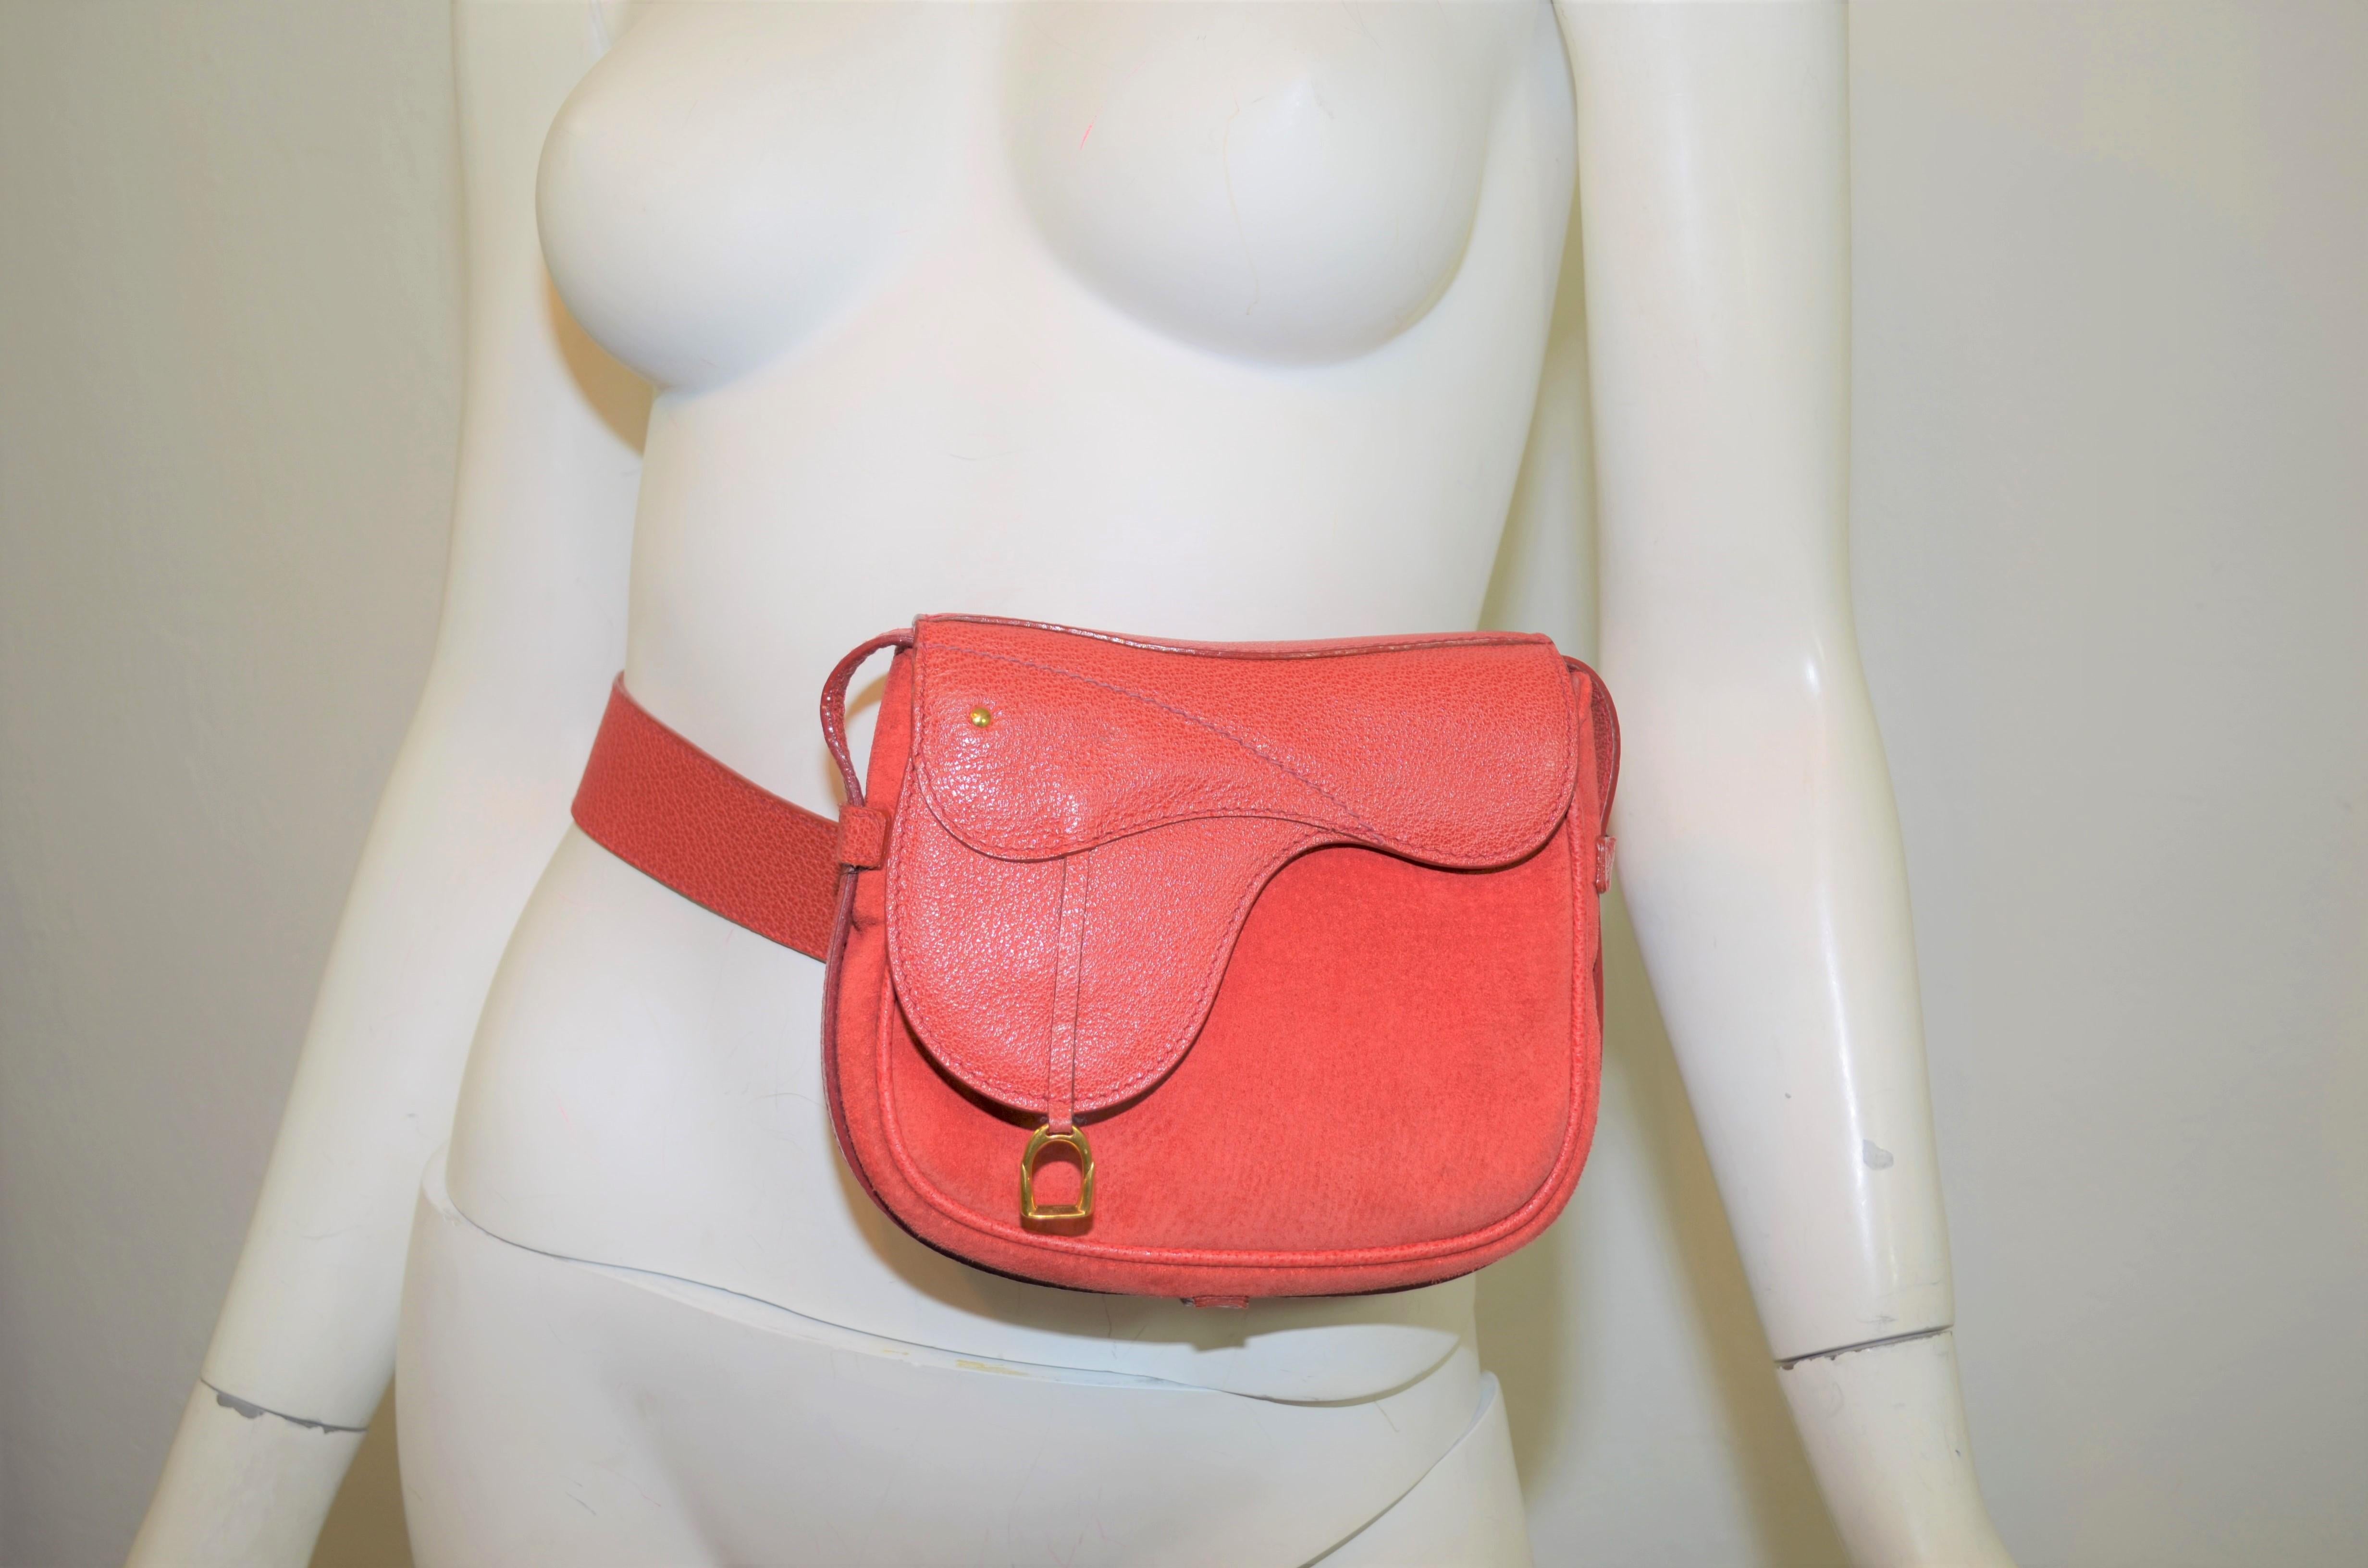 Vintage Gucci bag featured in red suede leather with a saddle design -- Bag can be worn crossbody style as well as a belt bag (shoulder strap can be completely removed), single snap closure at the front and a full jacquard lining. Bag is in great